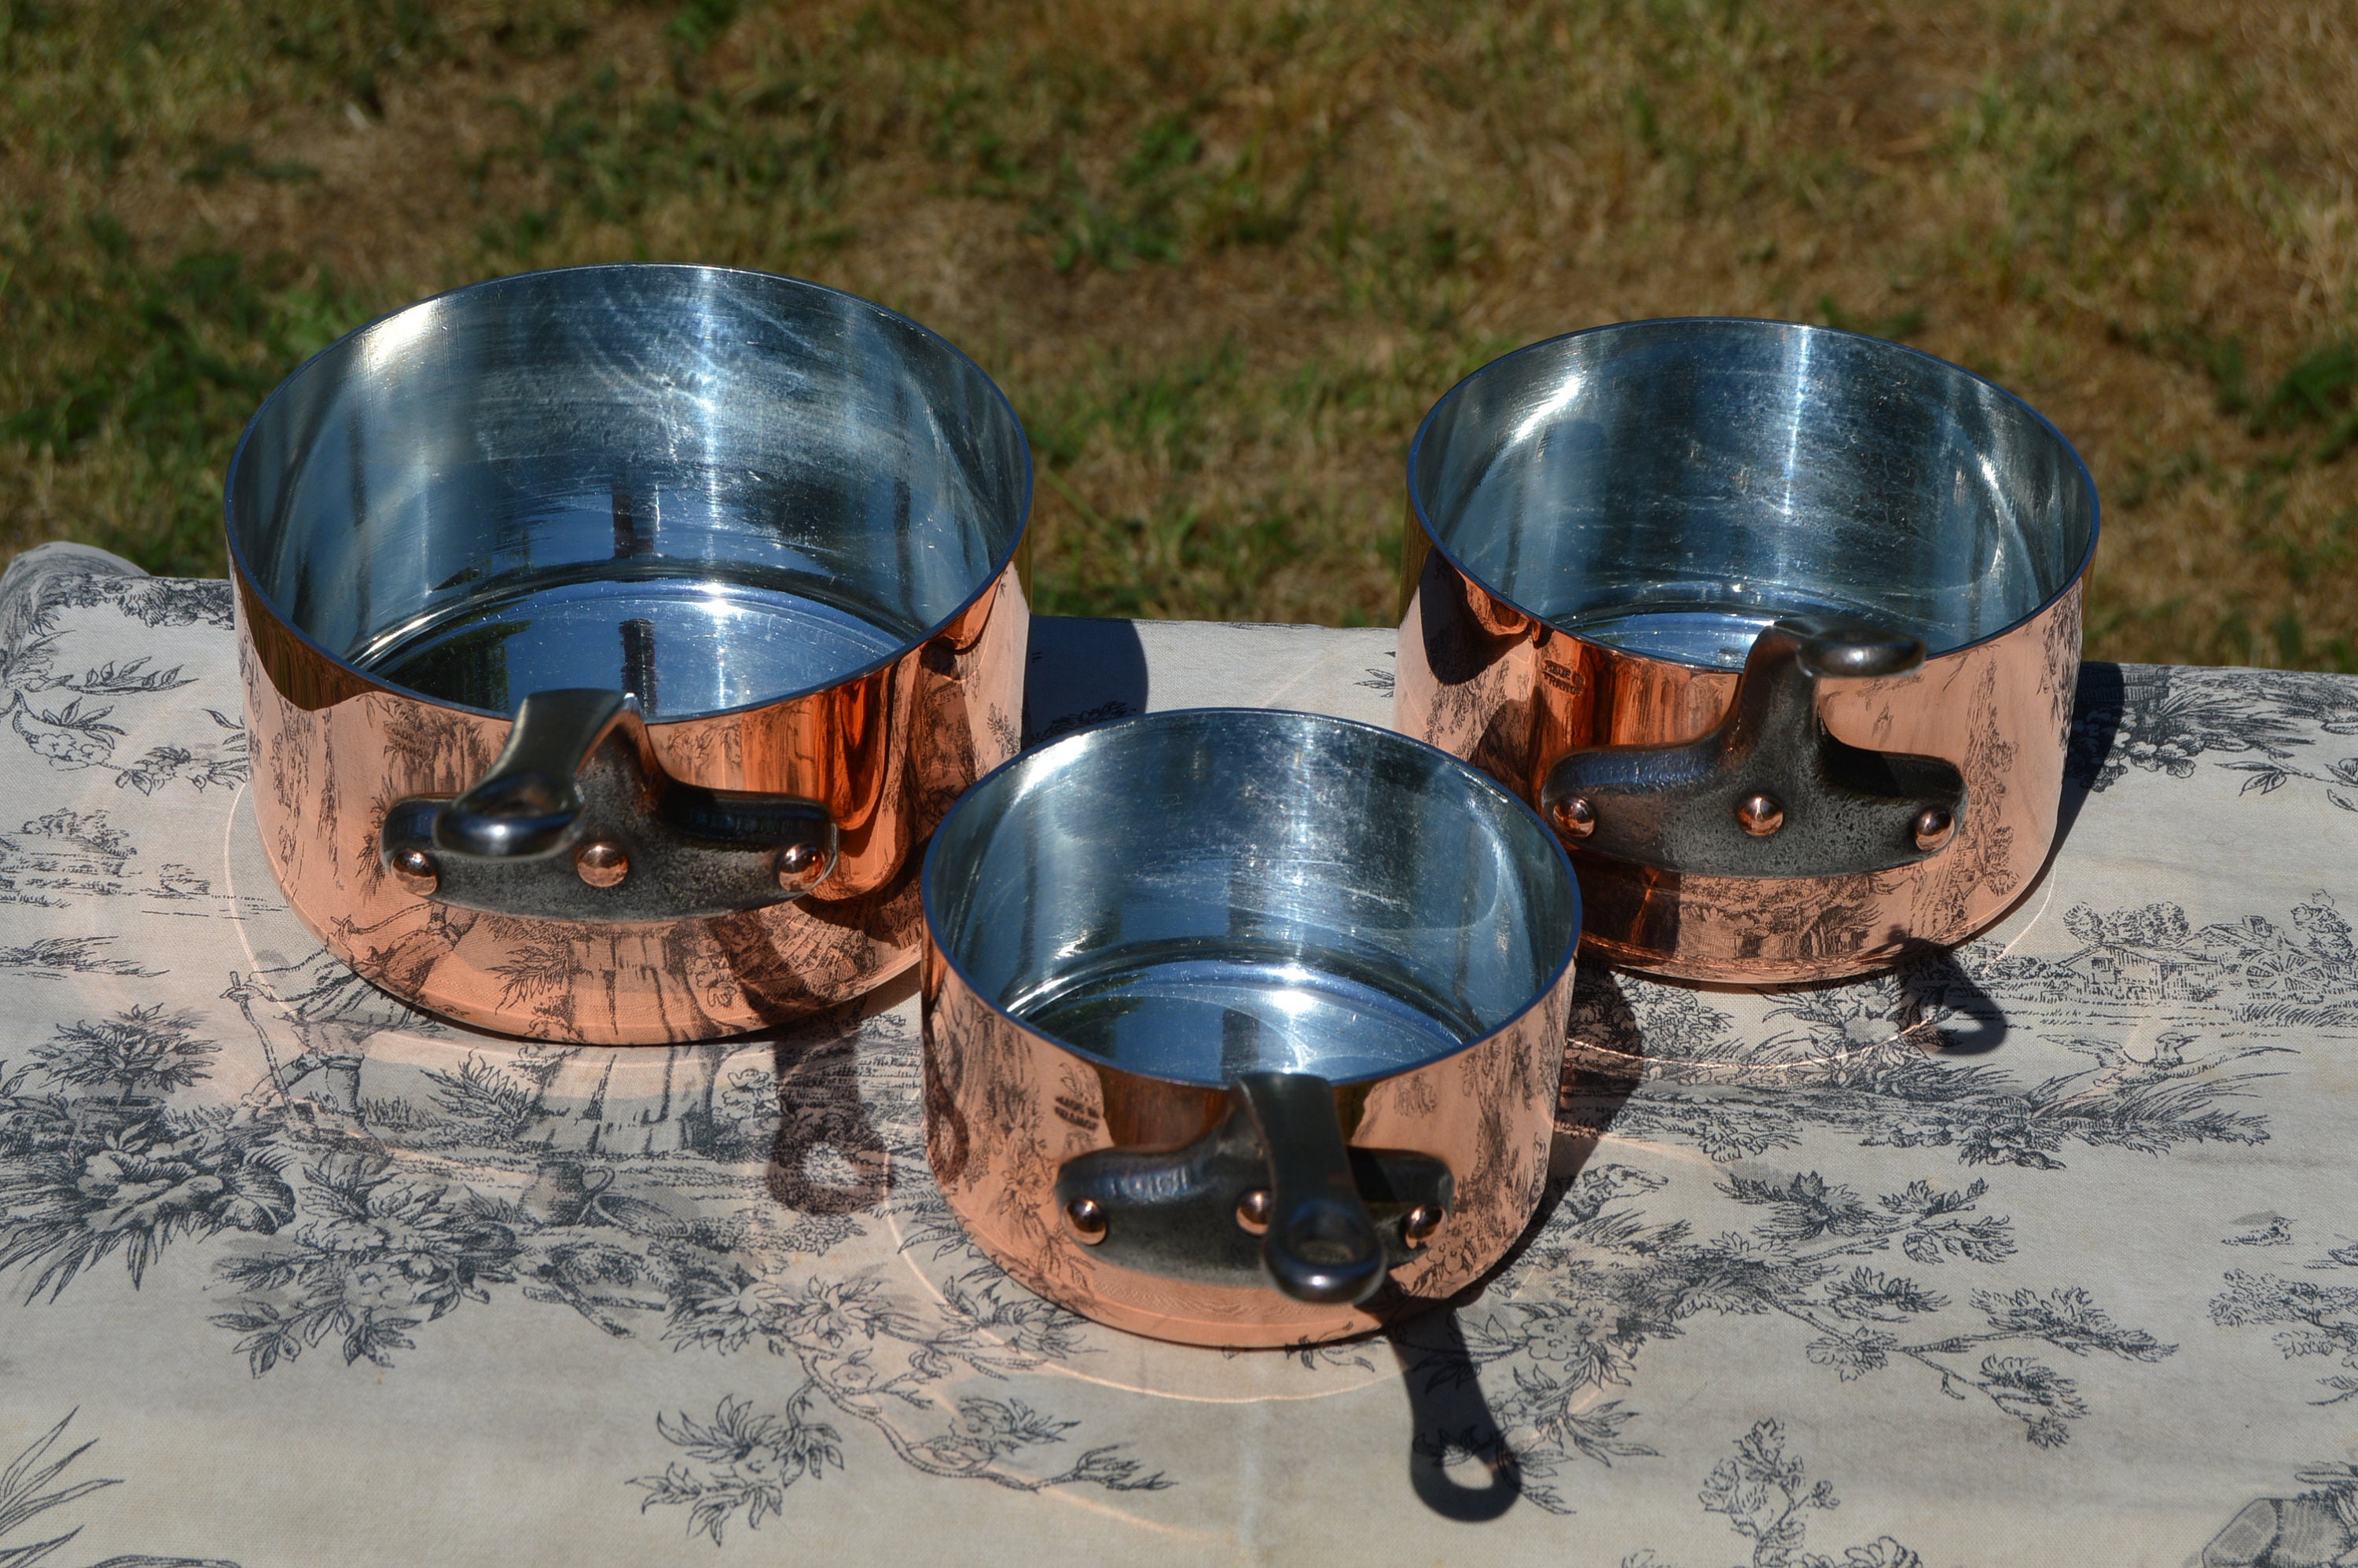 Fabrication Francaise Copper 3 Qt Dutch Oven w/ tin lining, Made in France